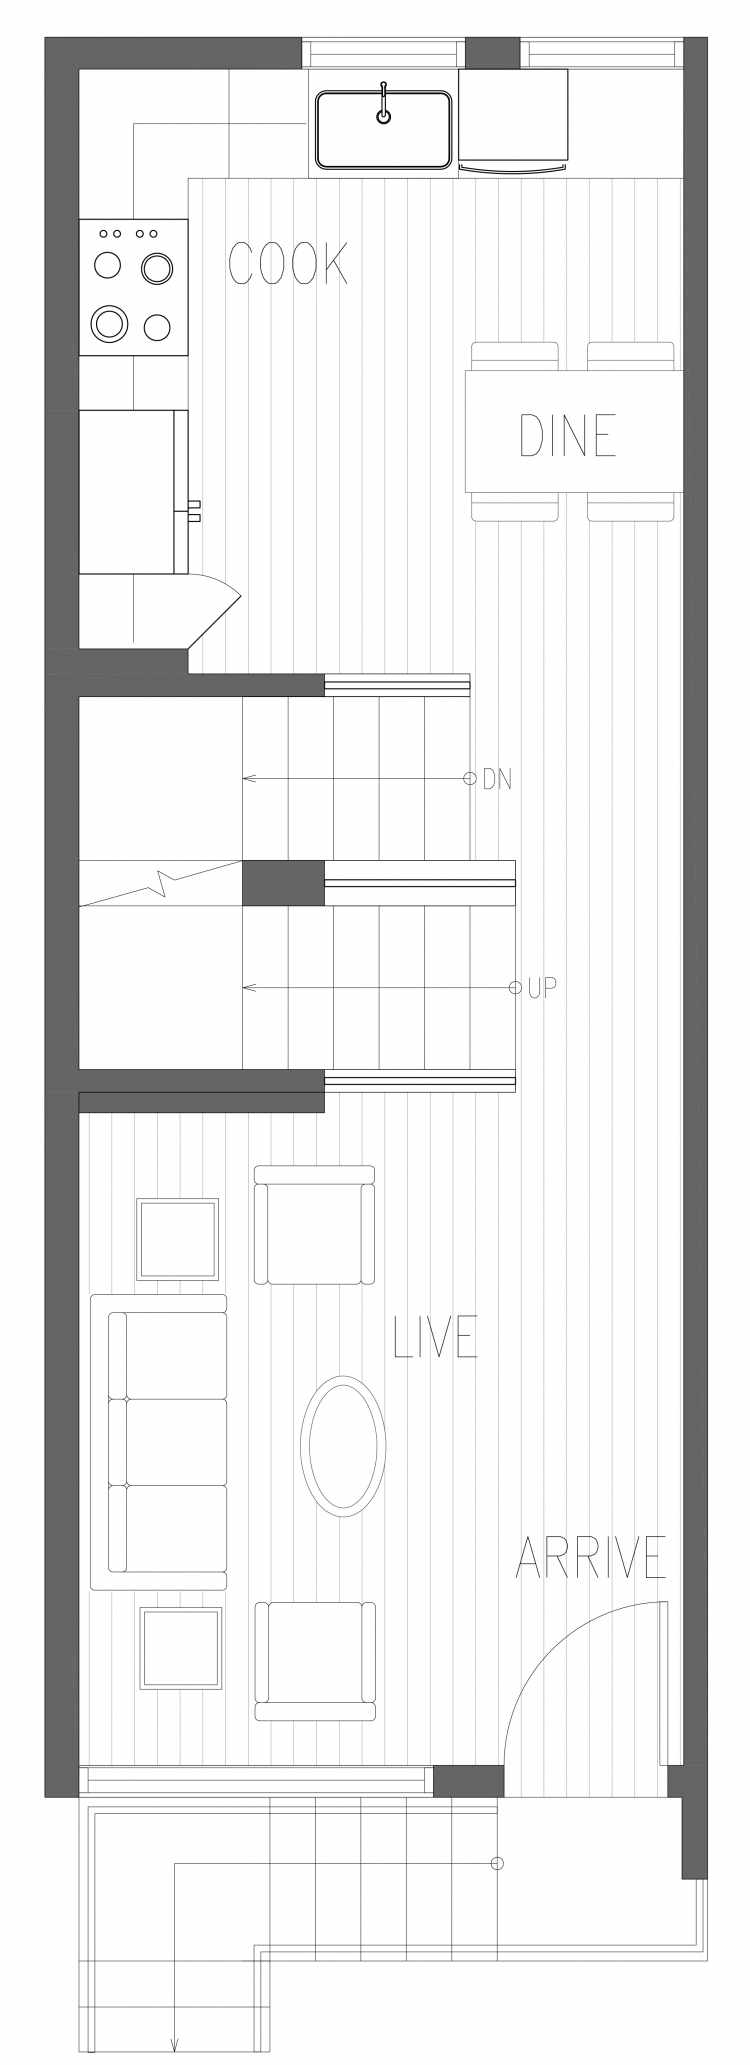 Second Floor Plan of 2357 Beacon Ave S, One of the Brea Townhomes in North Beacon Hill